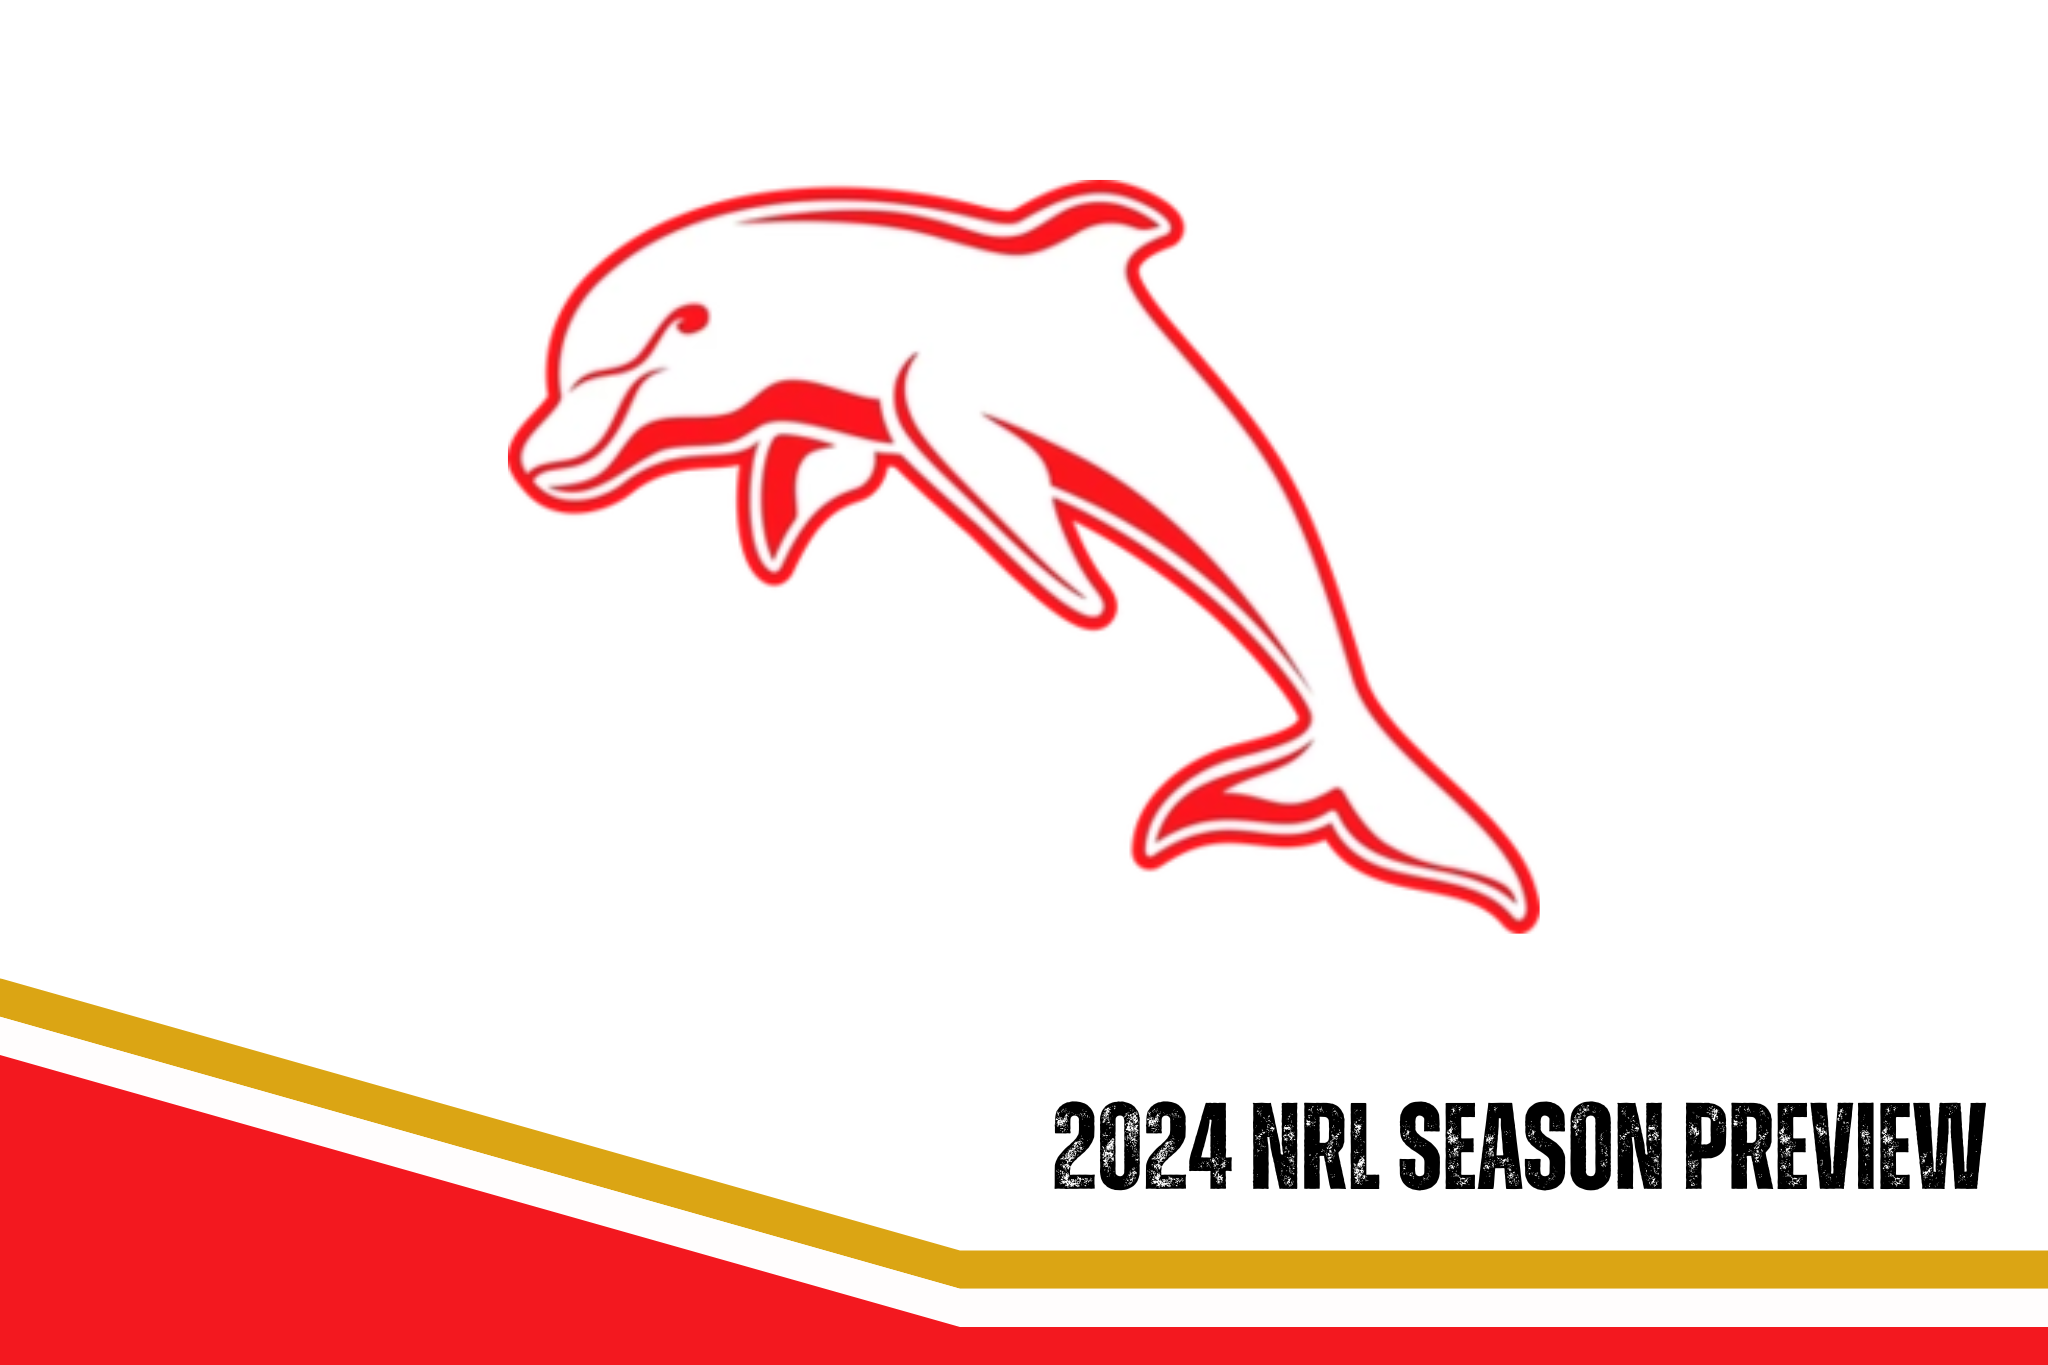 Dolphins 2024 season preview